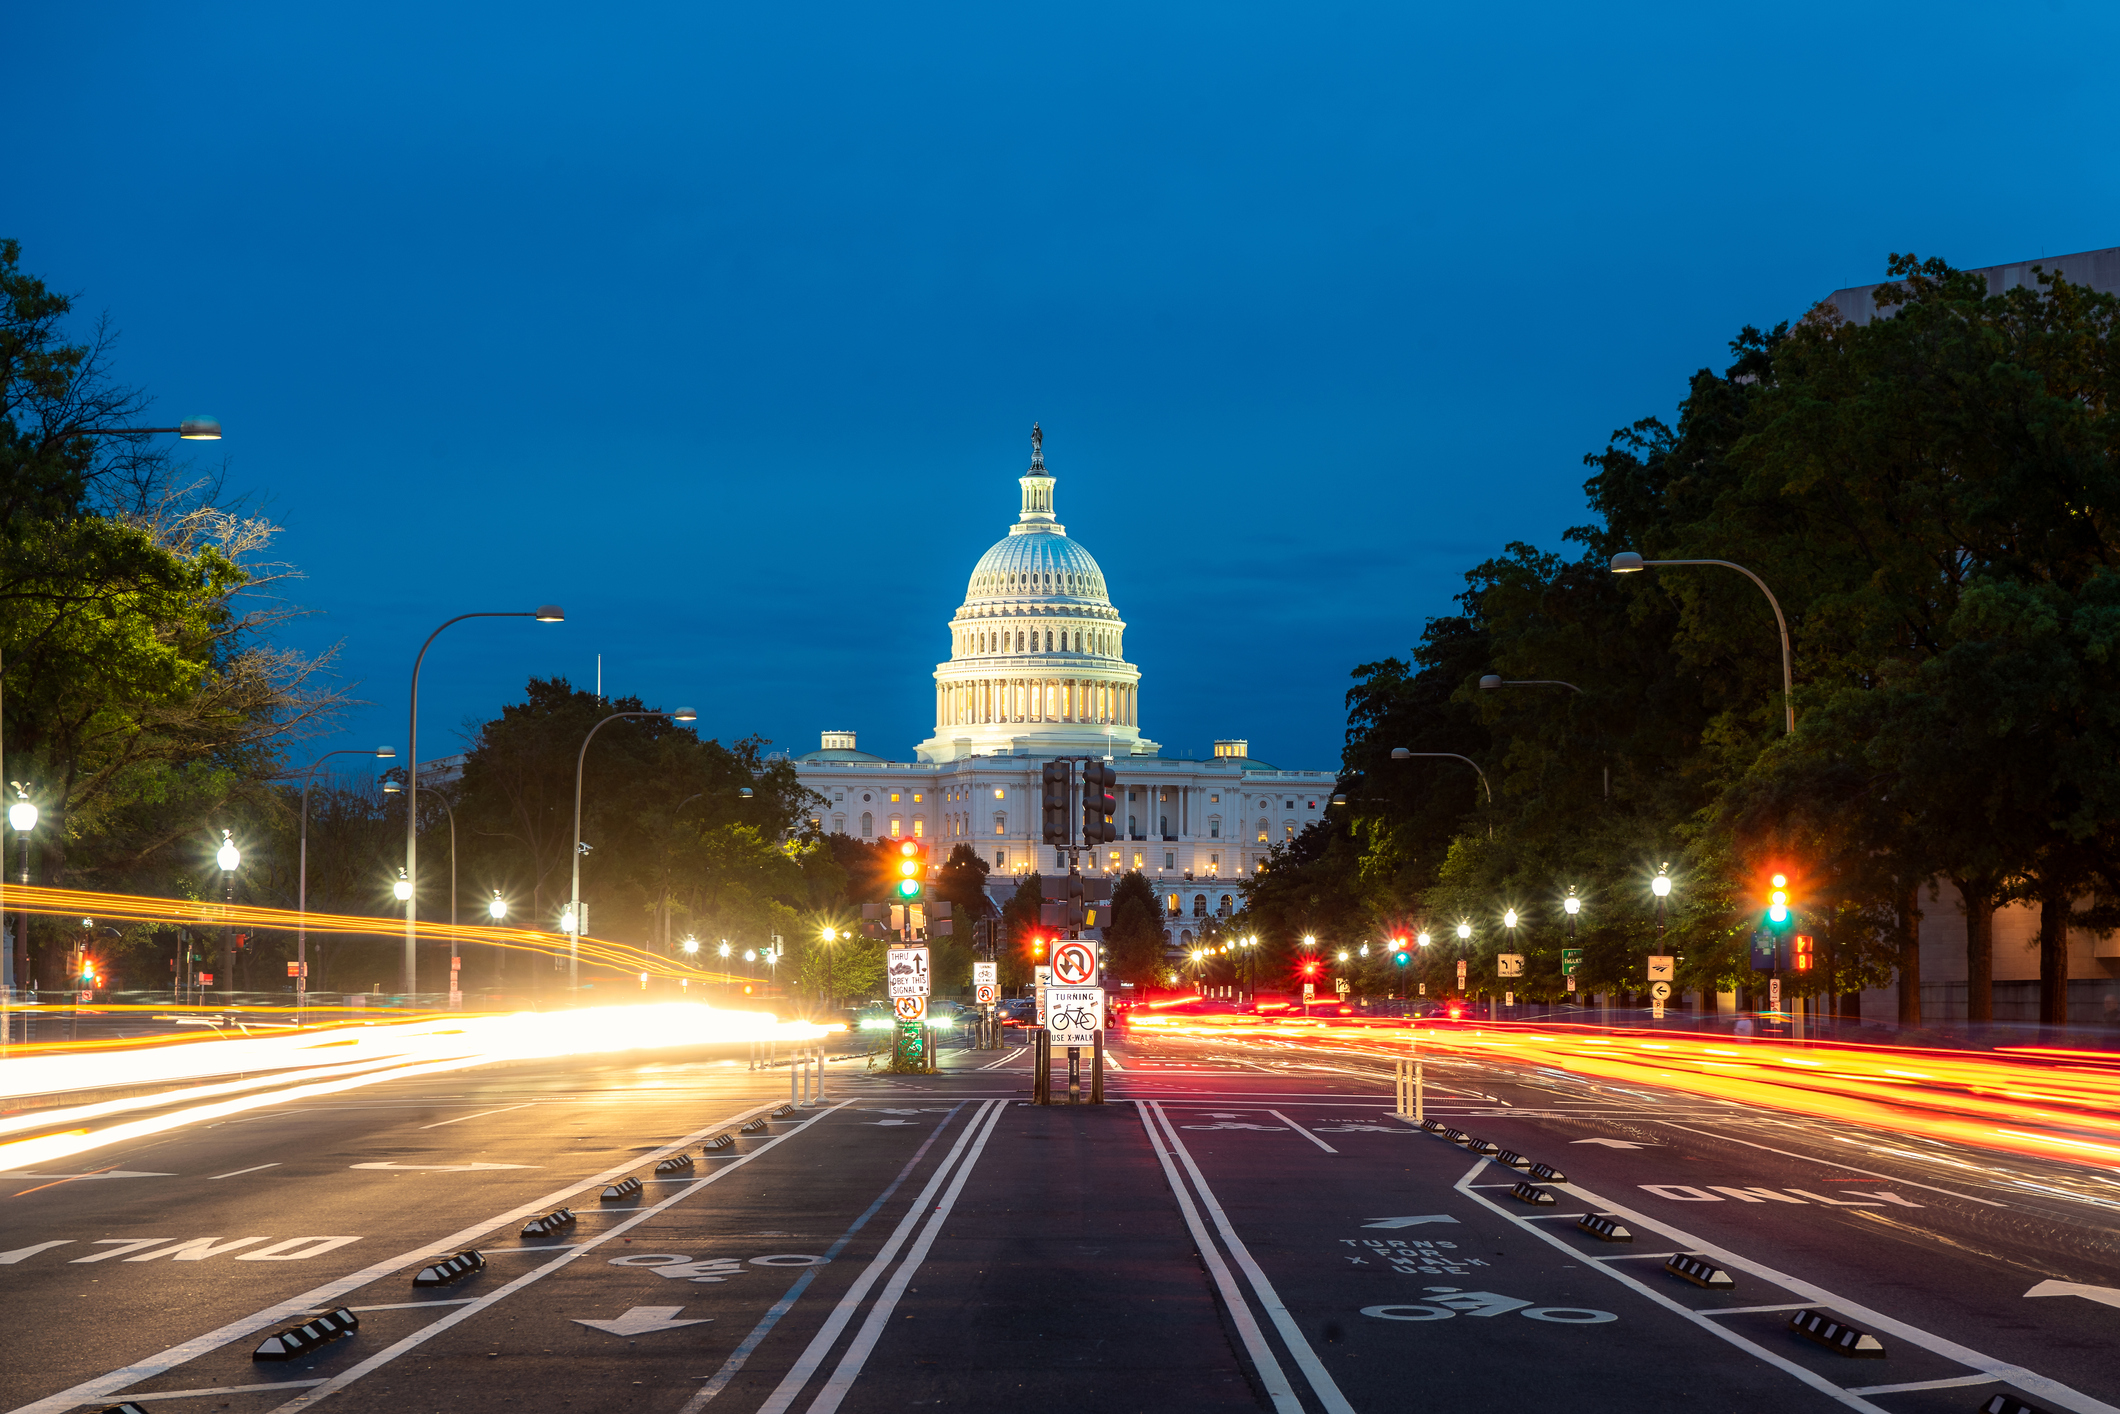 The United States Capitol building at night in Washington DC, USA. (Getty Images)